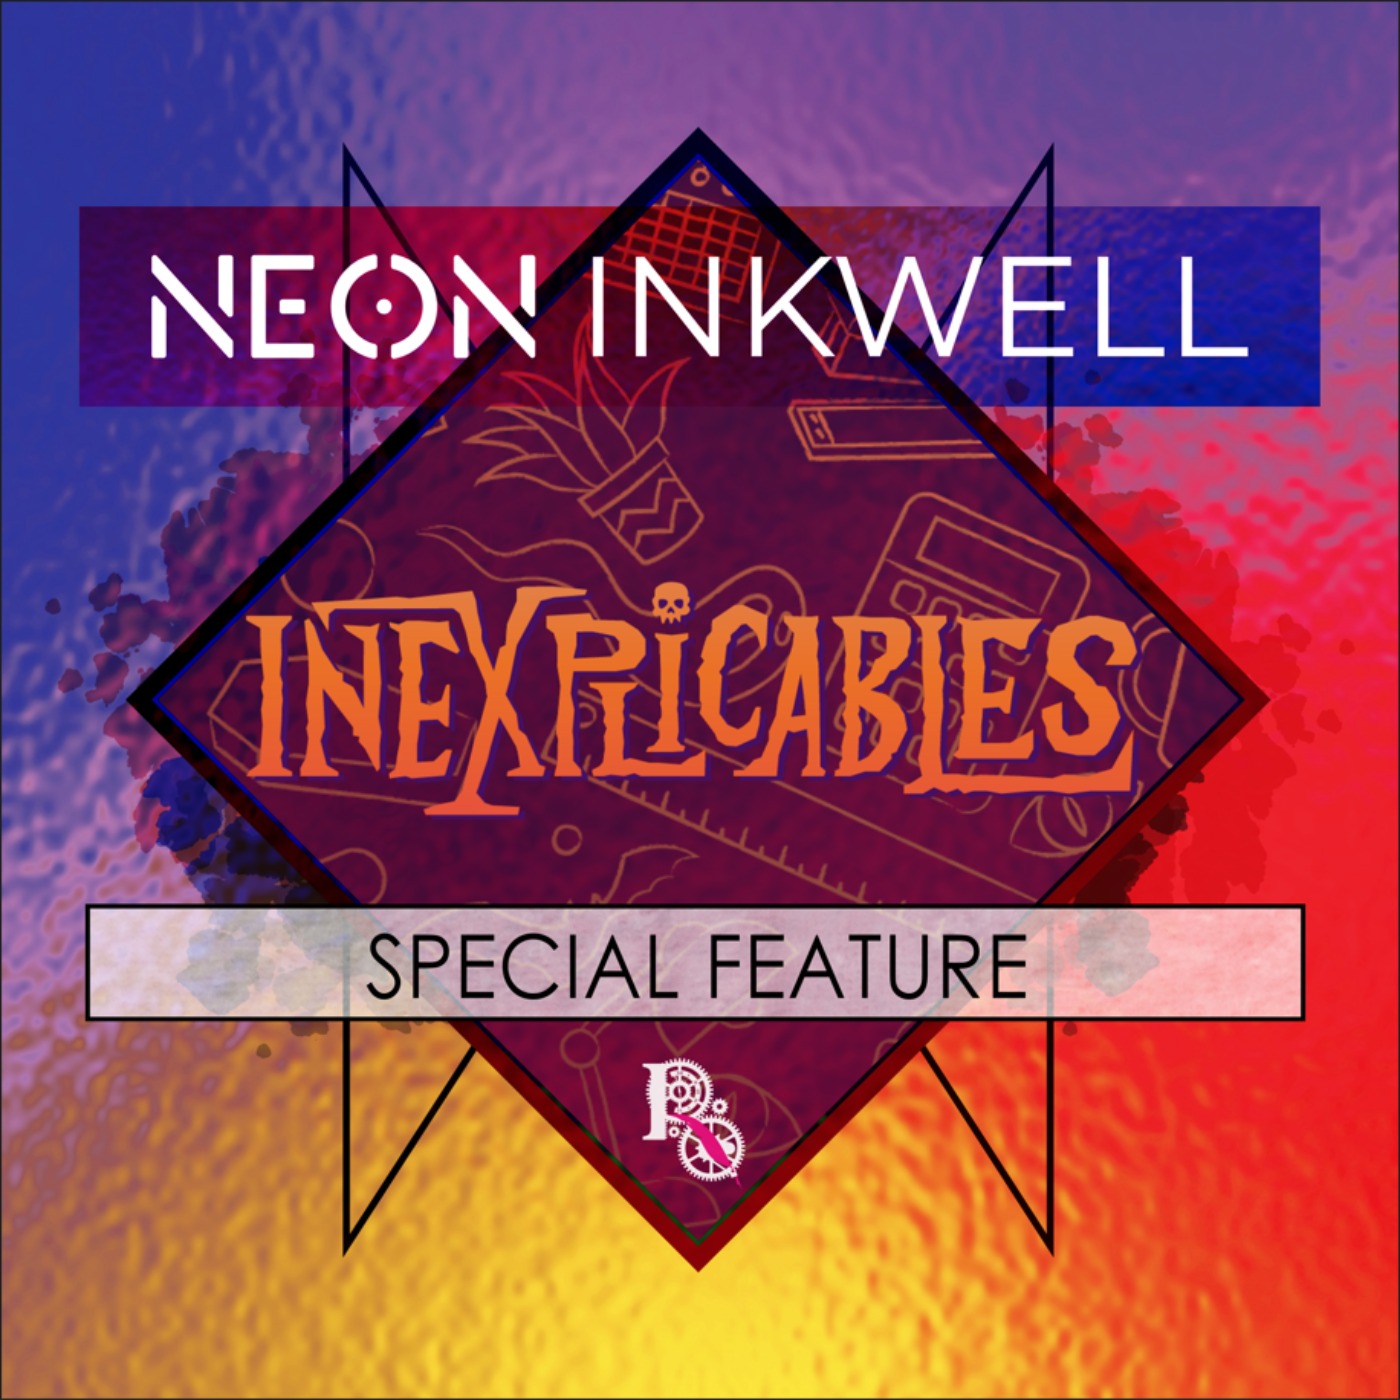 Neon Inkwell: Inexplicables (2021) 5